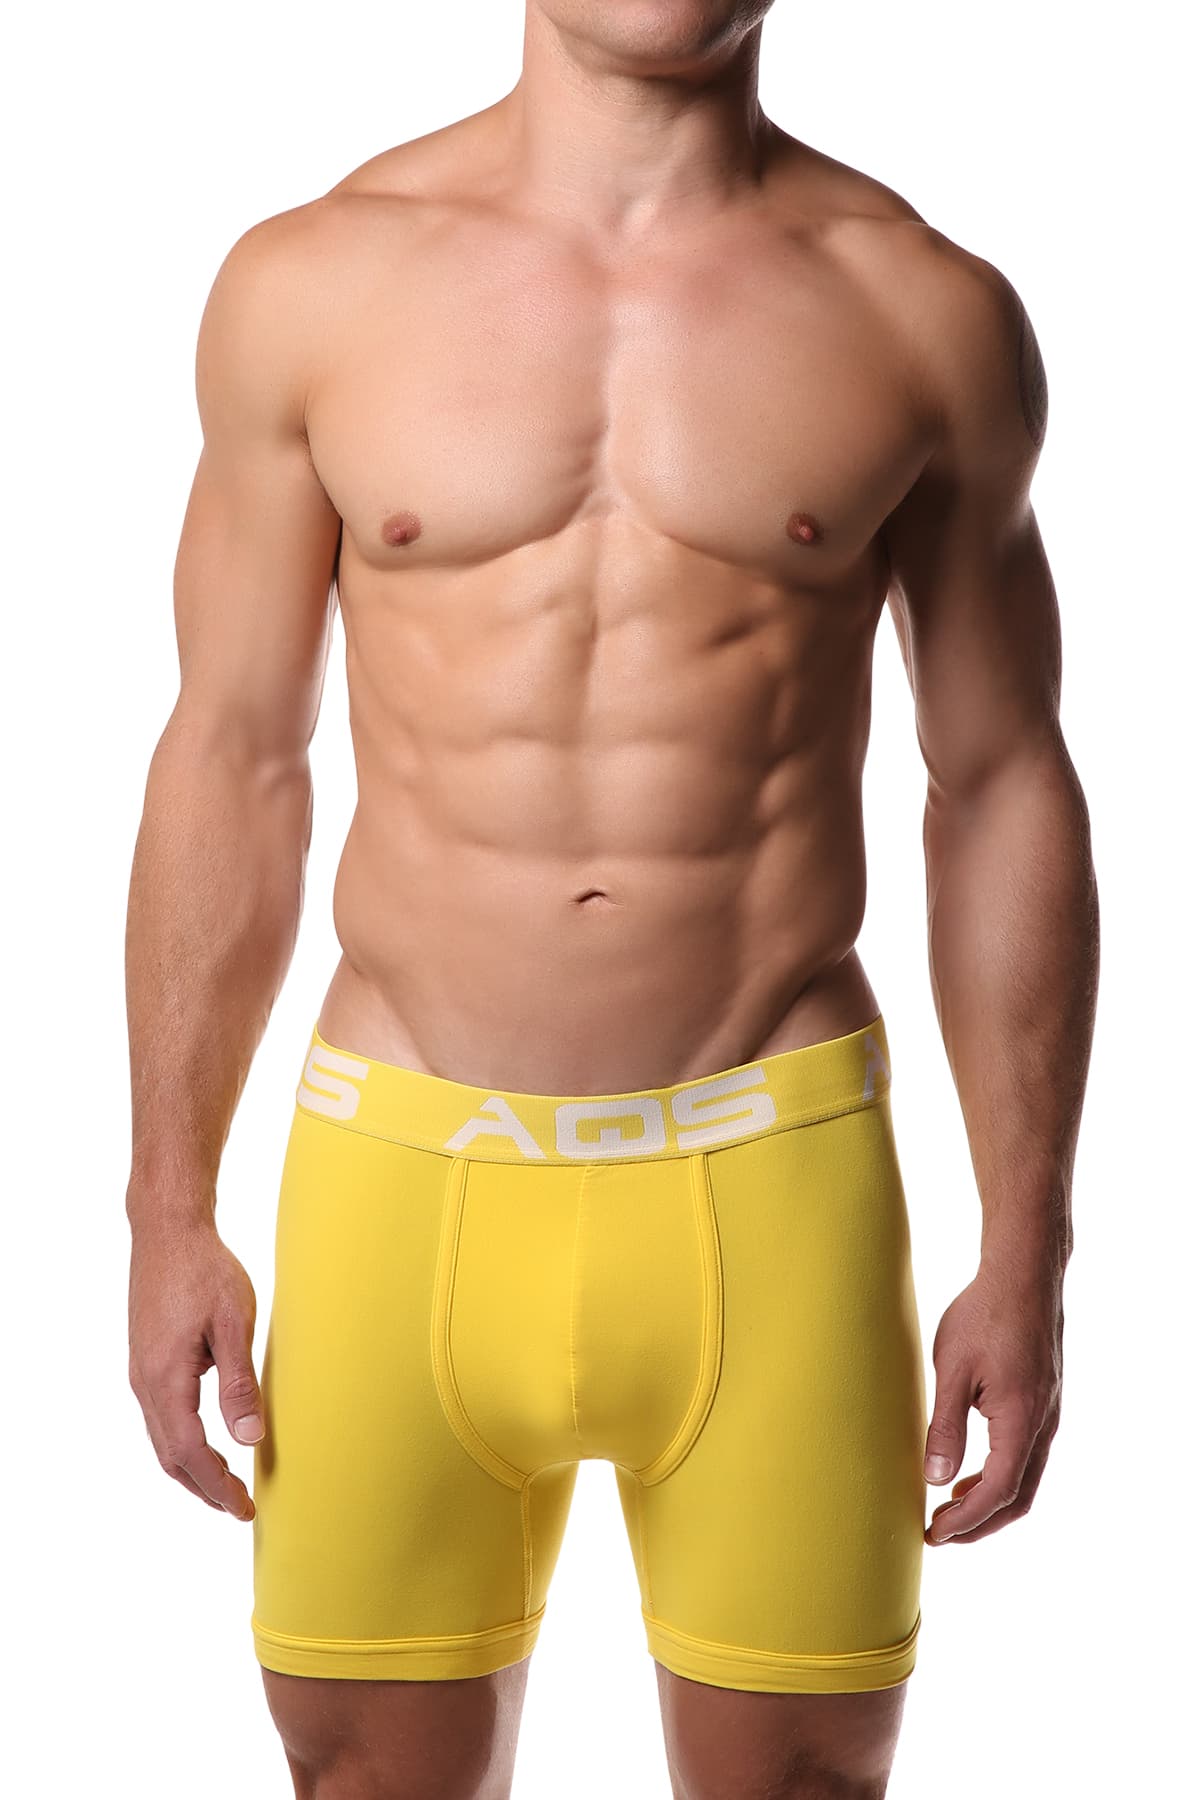 AQS Orange/Yellow/Lime Boxer Brief 3-Pack